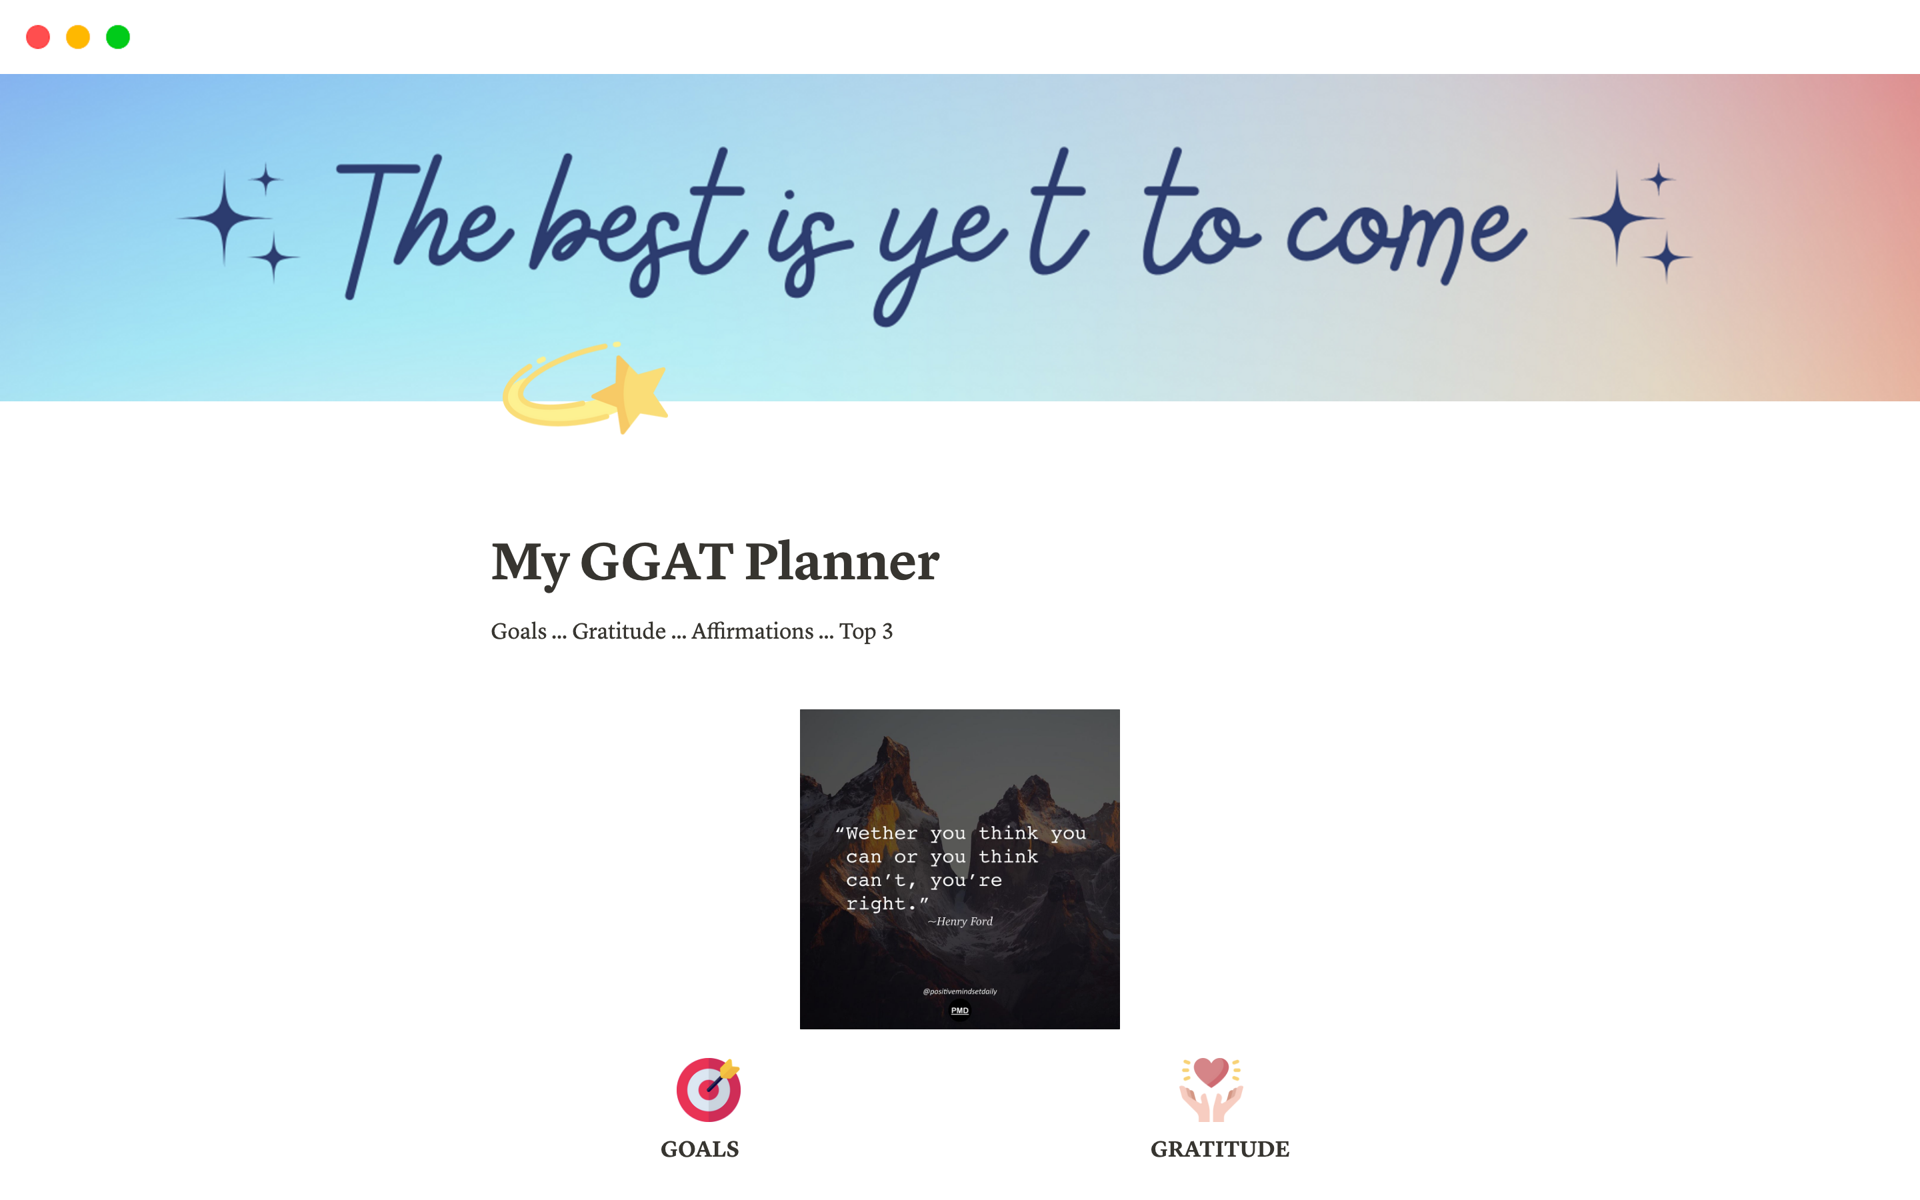 Track  your Goals, Gratitude, Affirmations & Top 3 Wins with the My GGAT Planner.
